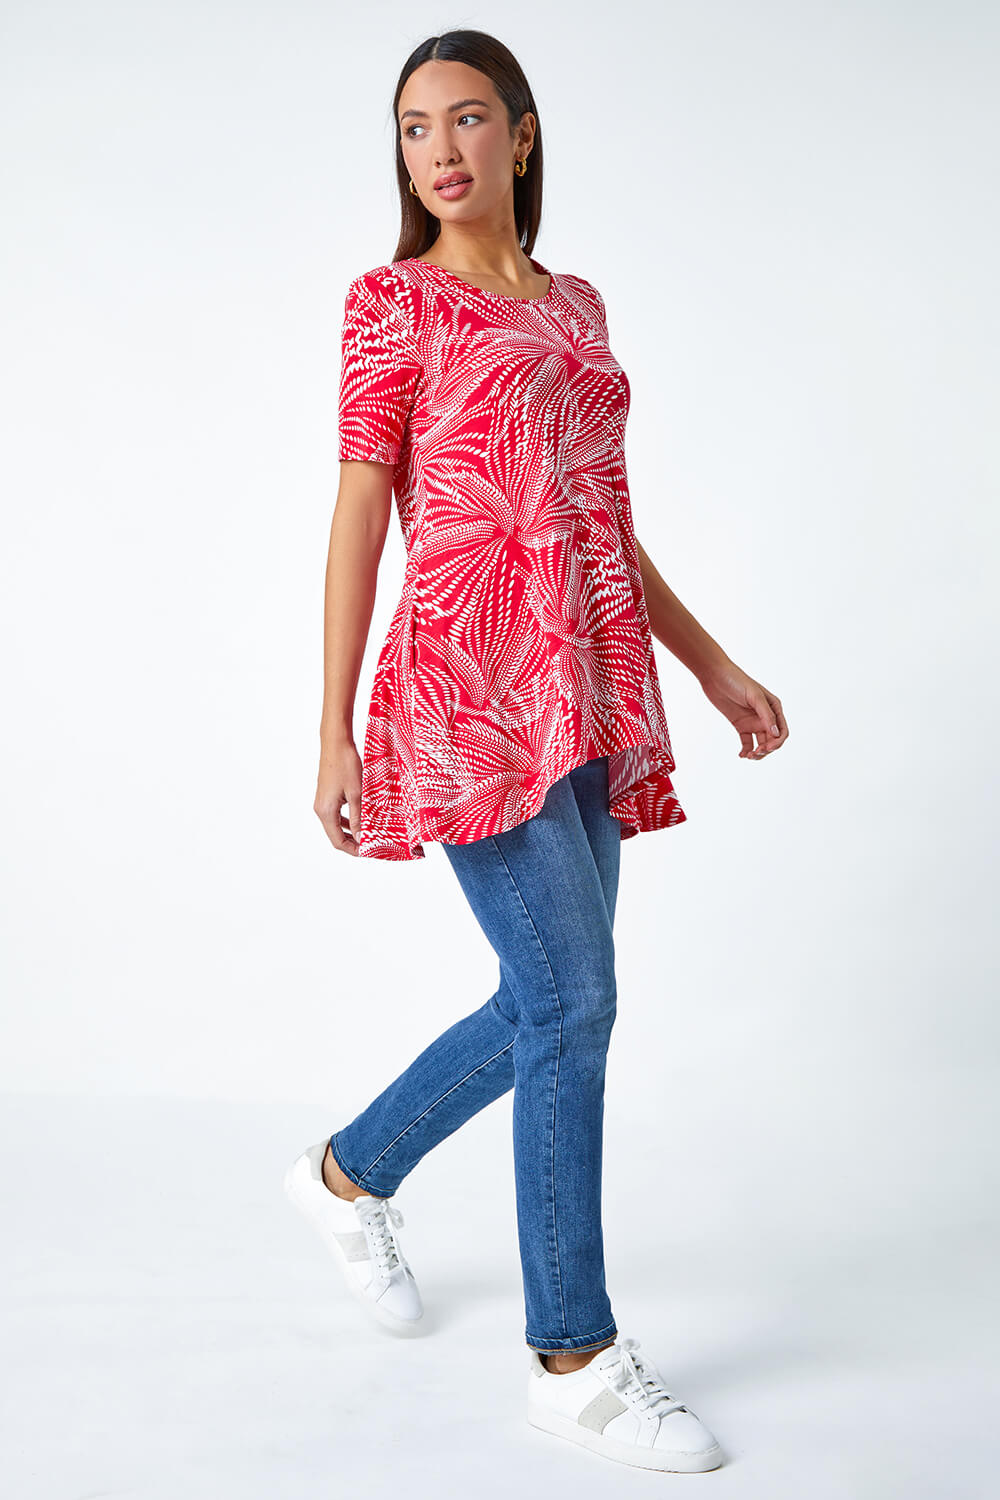 Red Textured Fan Print Stretch Hanky Hem Top, Image 2 of 5